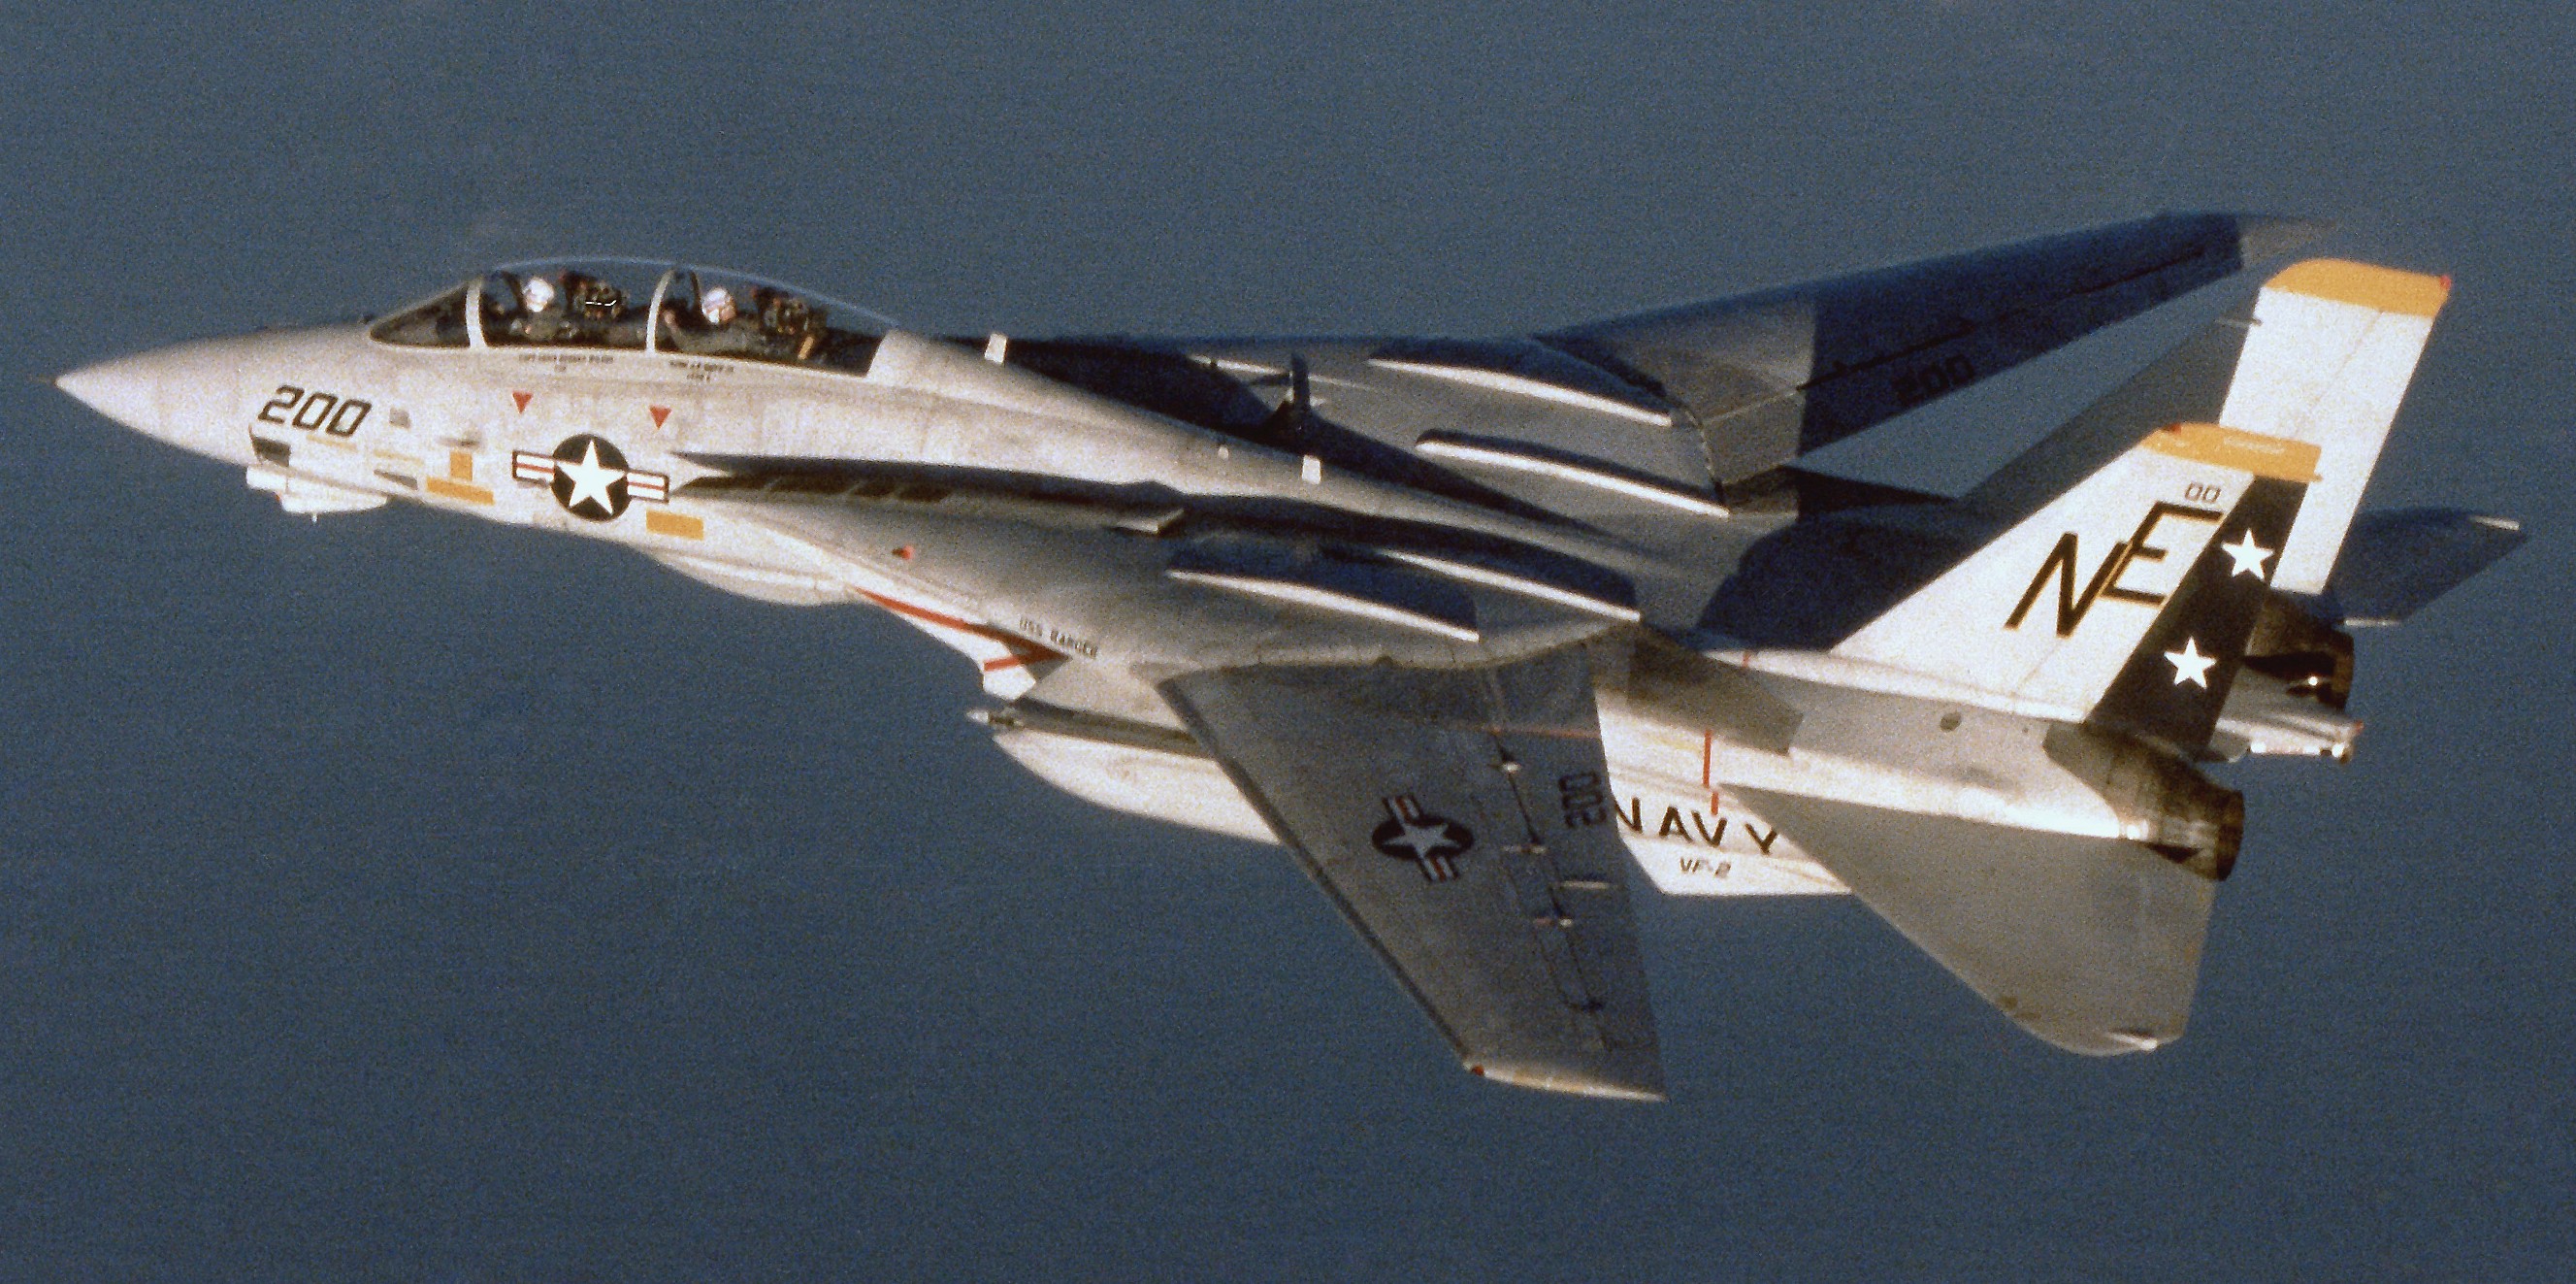 vf-2 bounty hunters fighter squadron fitron f-14a tomcat carrier air wing cvw-2 uss ranger cv-61 07